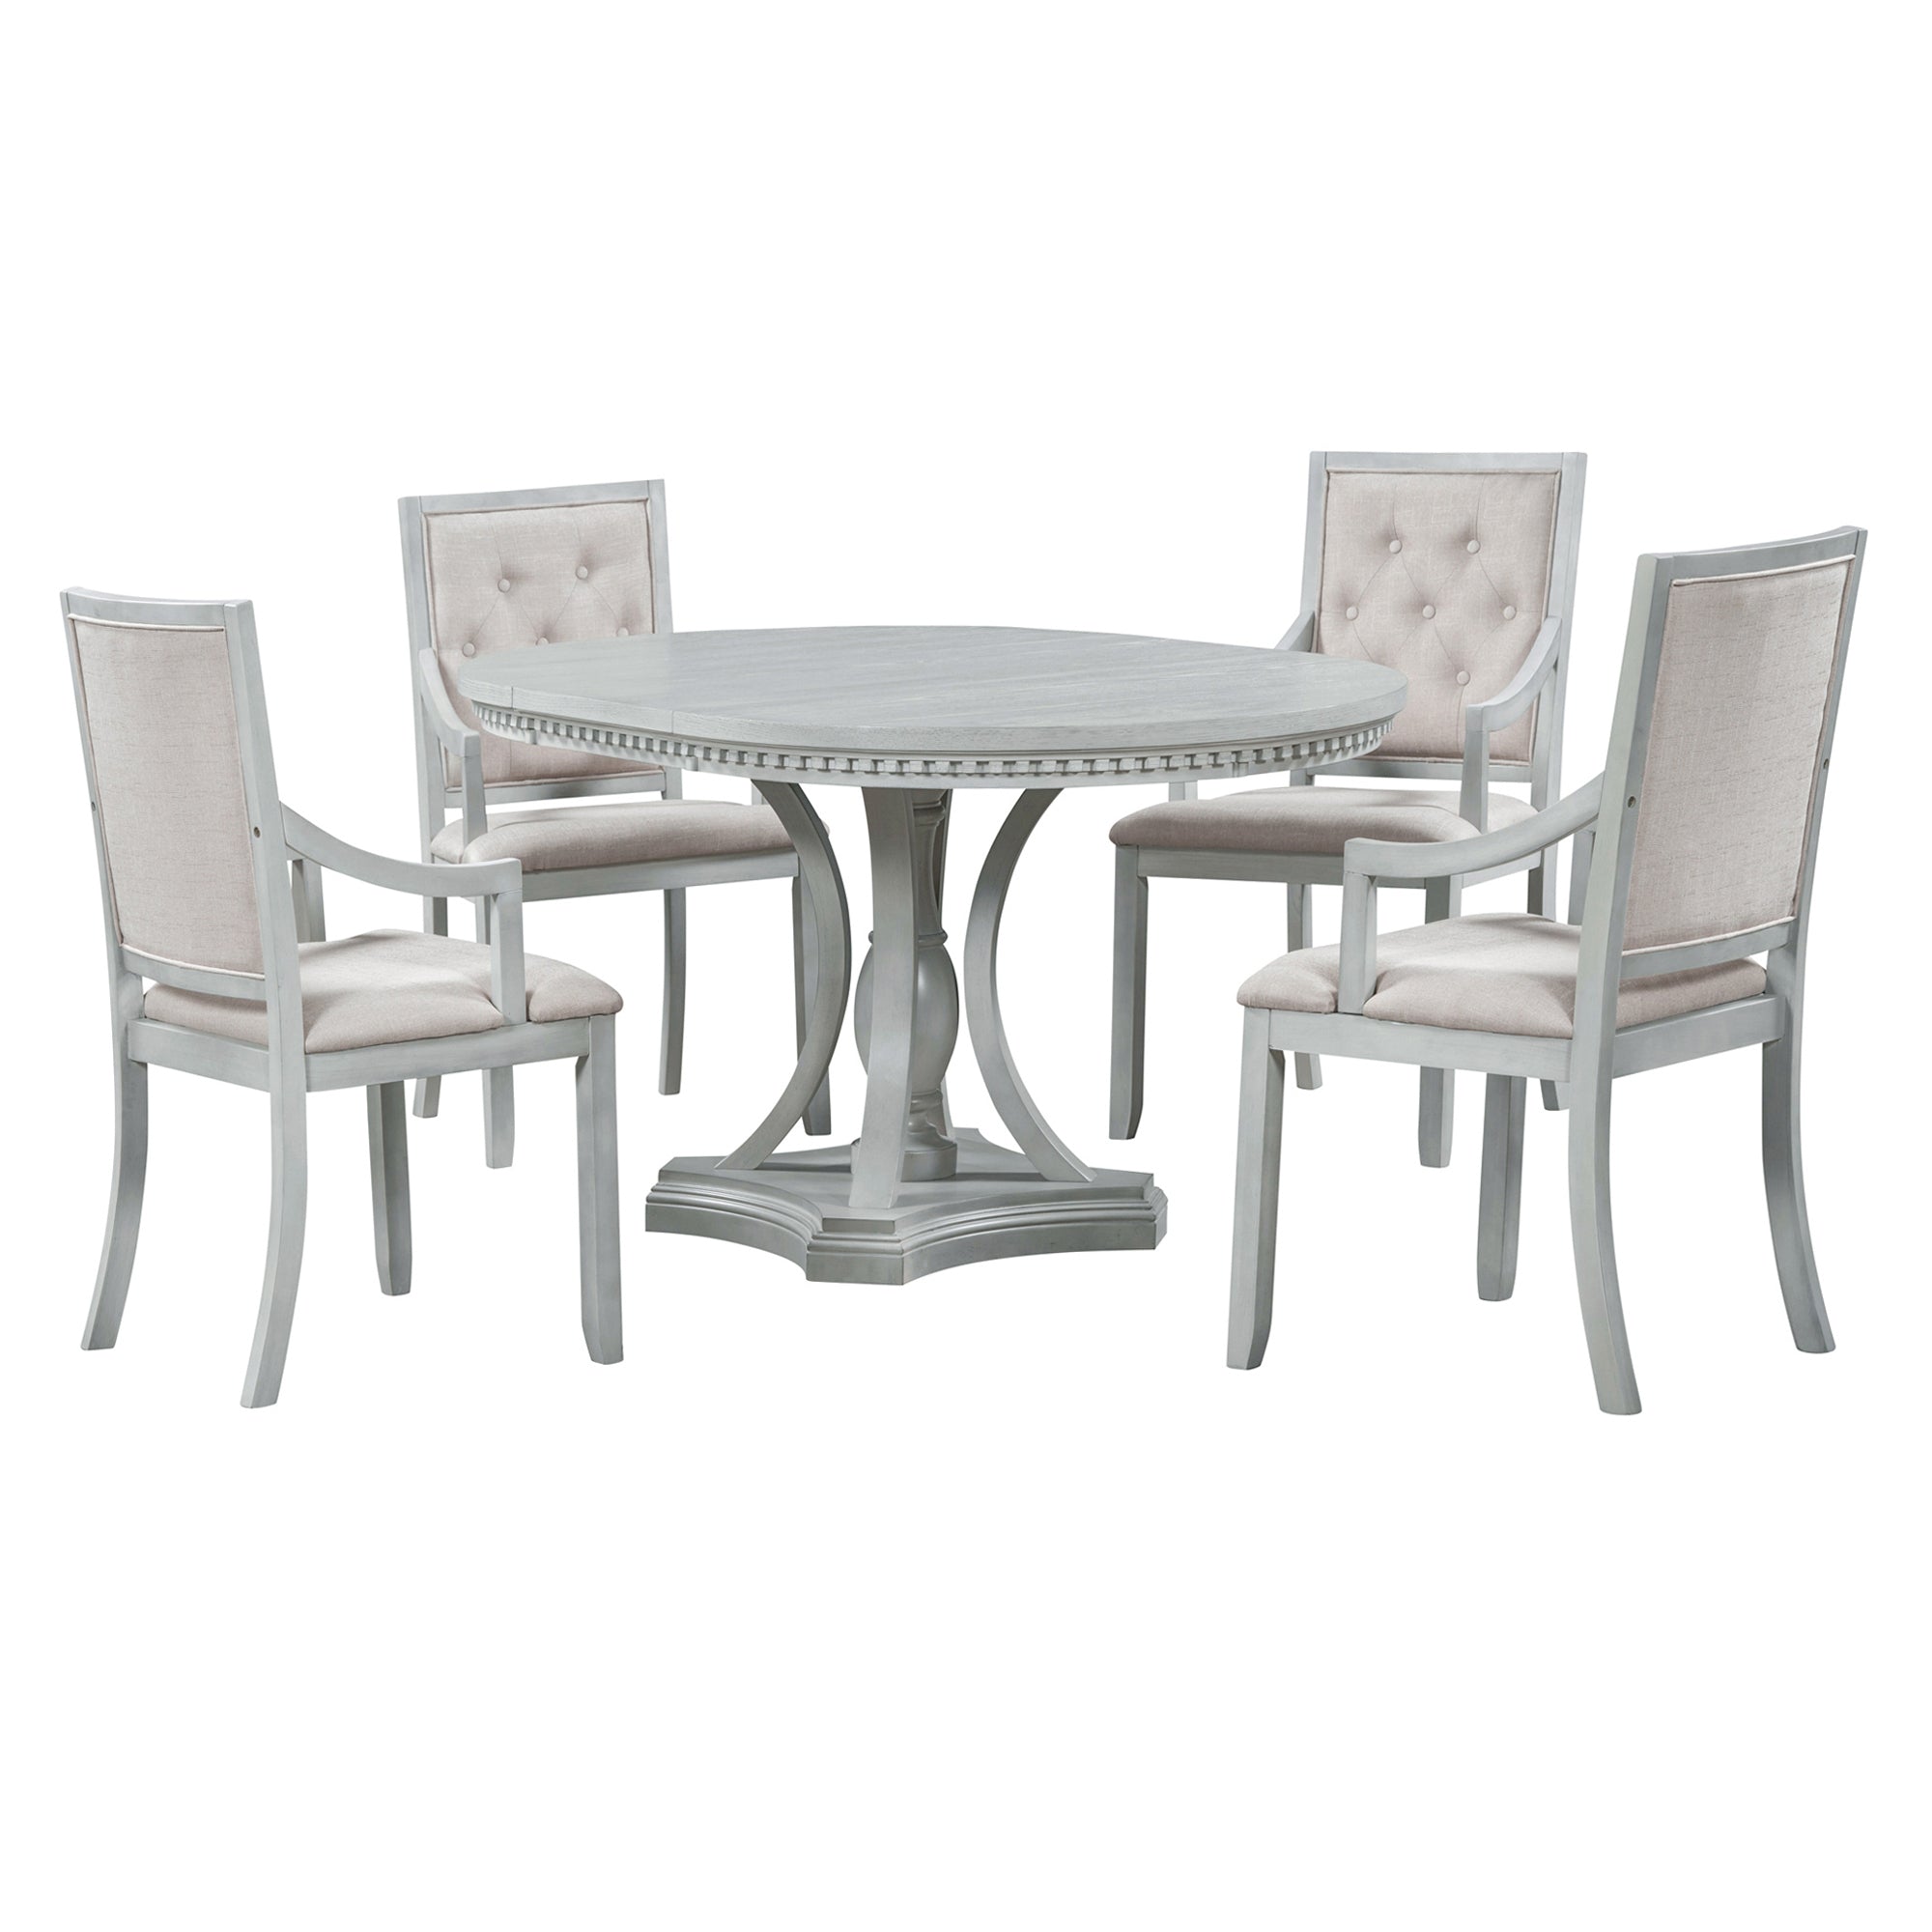 Retro 5-piece Dining Set Extendable Round Table and 4 Chairs - Antique Grey Oak